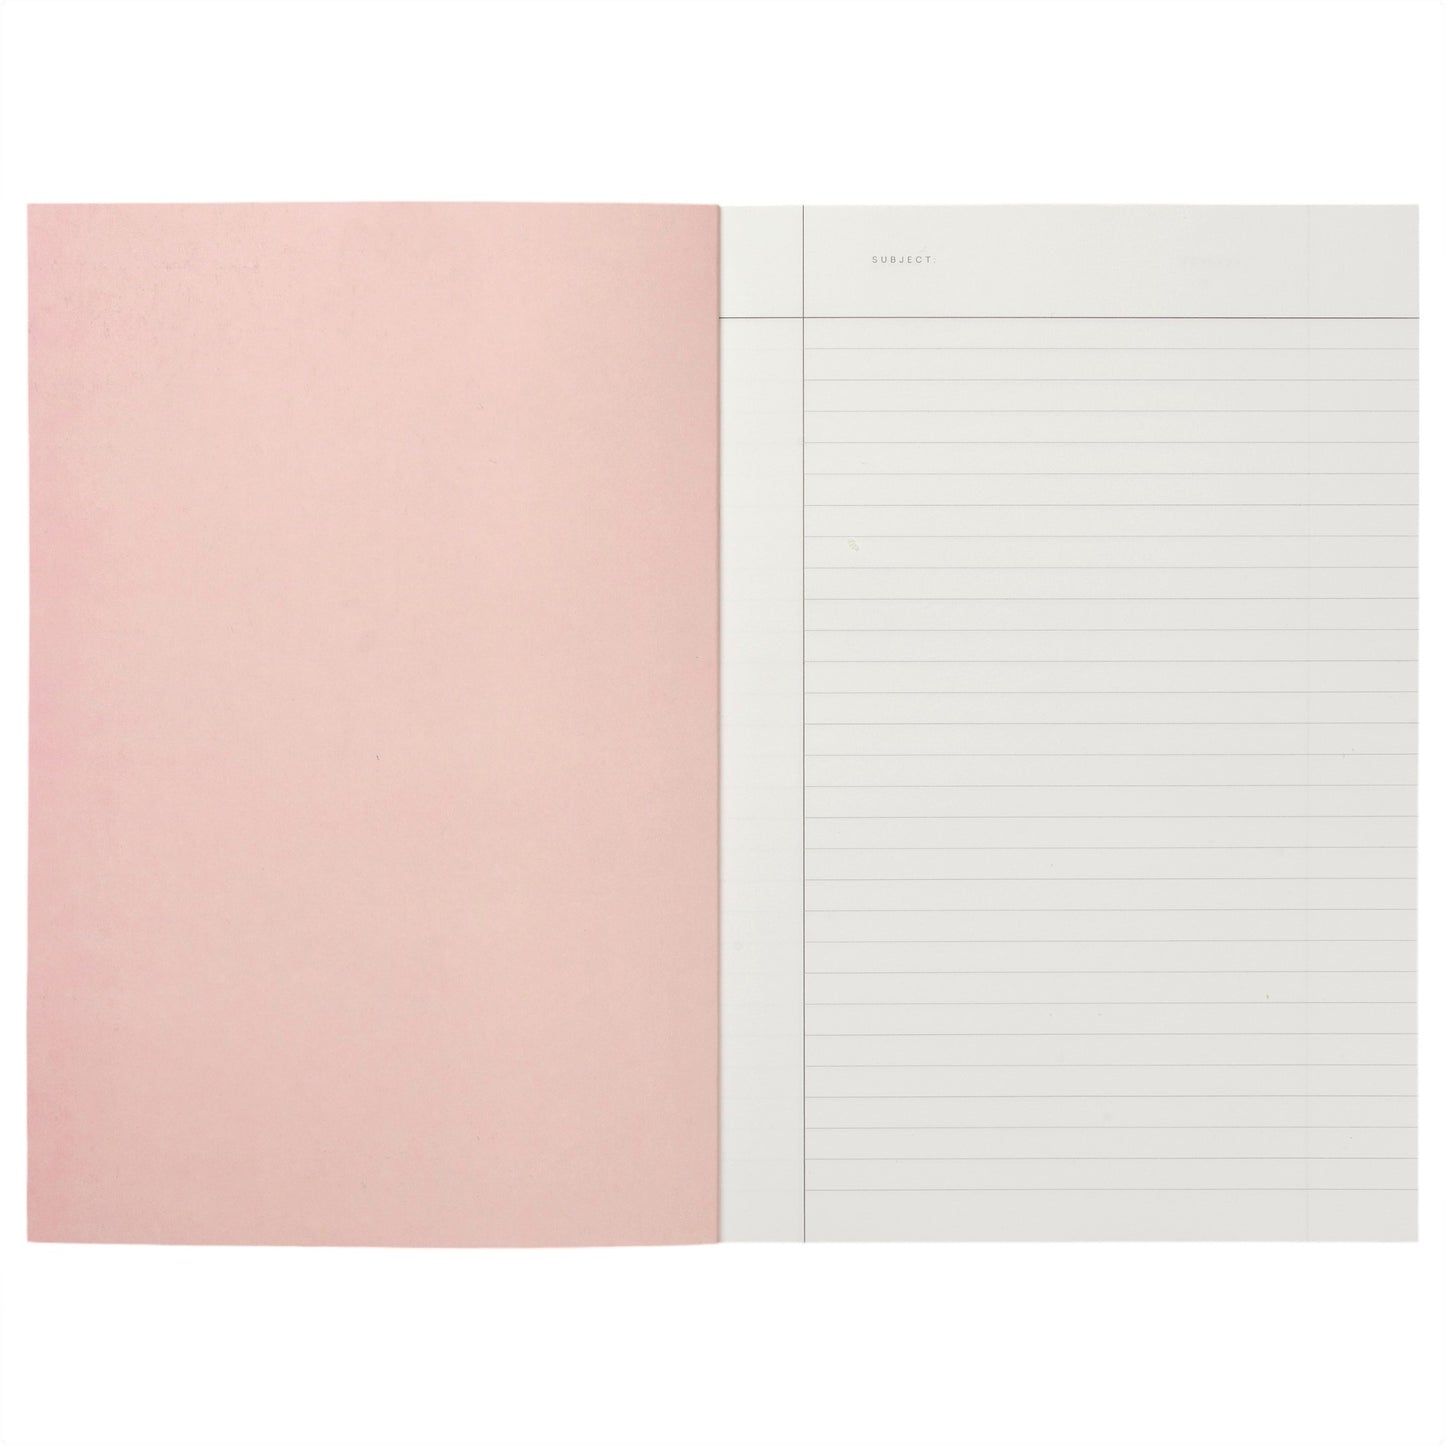 Notebook with a green grid softcover. Lined inner pages with margin pictured